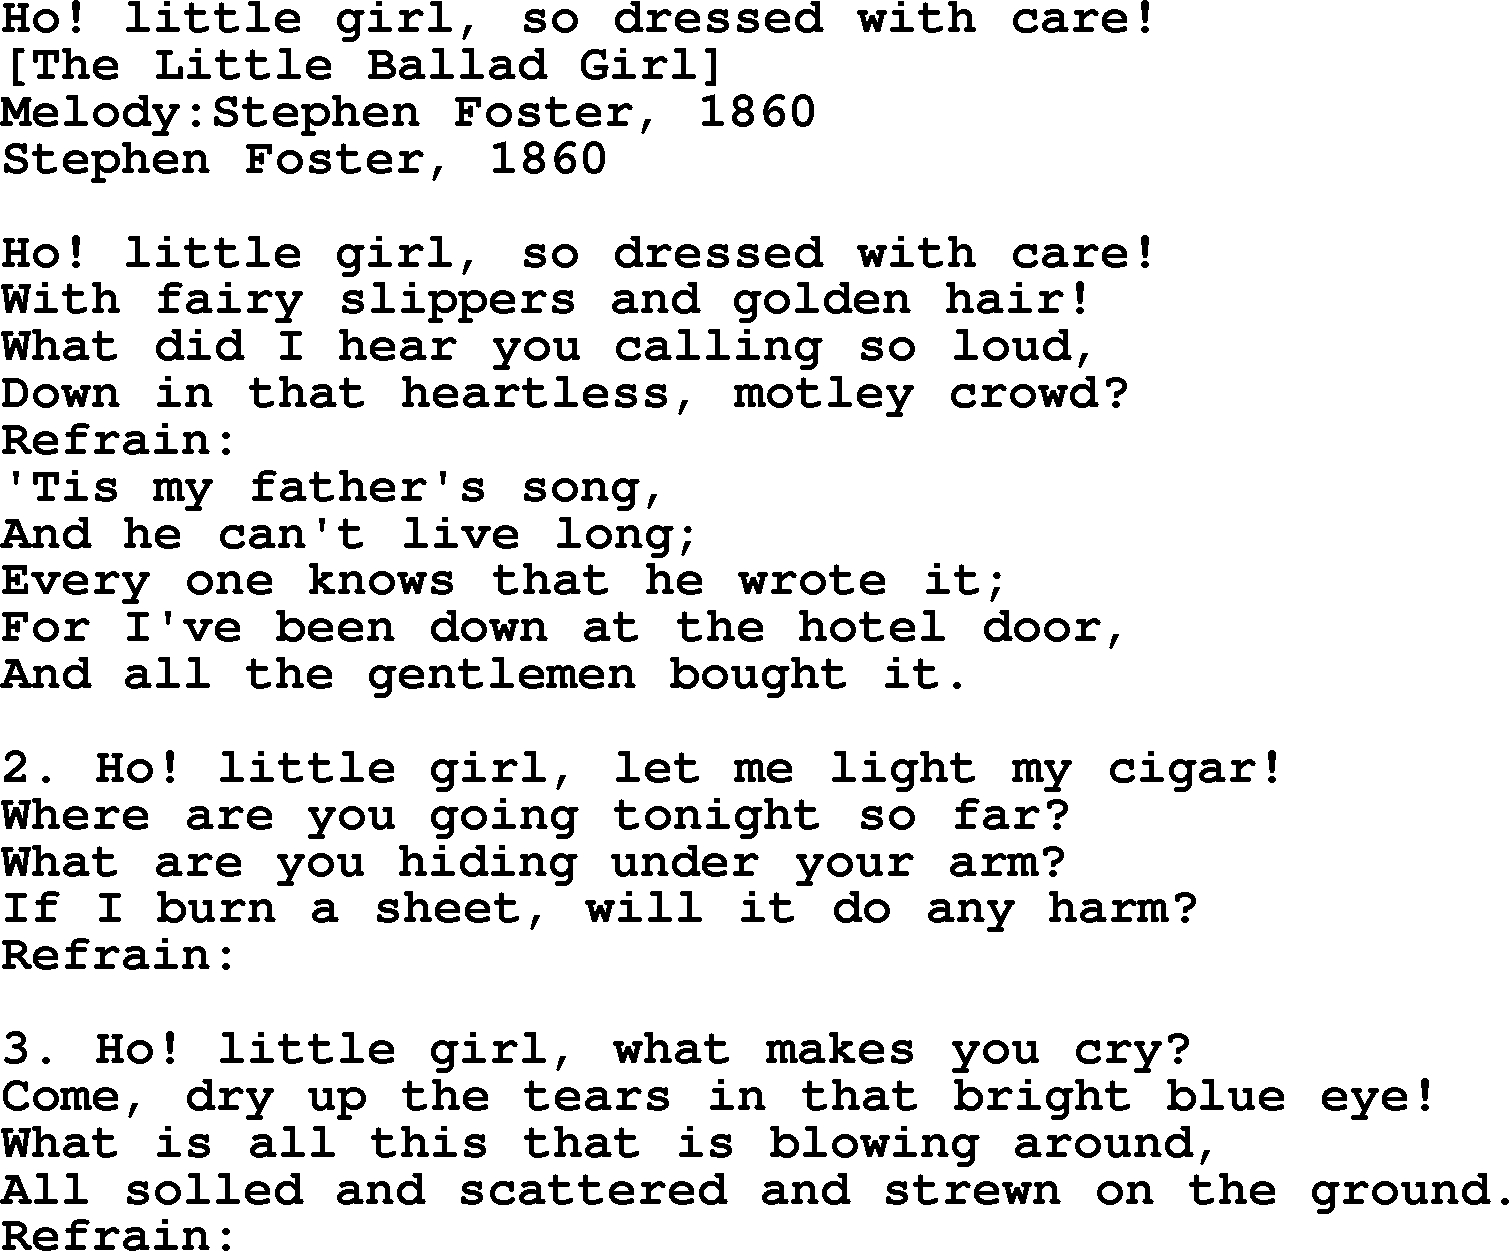 Old American Song: Ho! Little Girl, So Dressed With Care!, lyrics